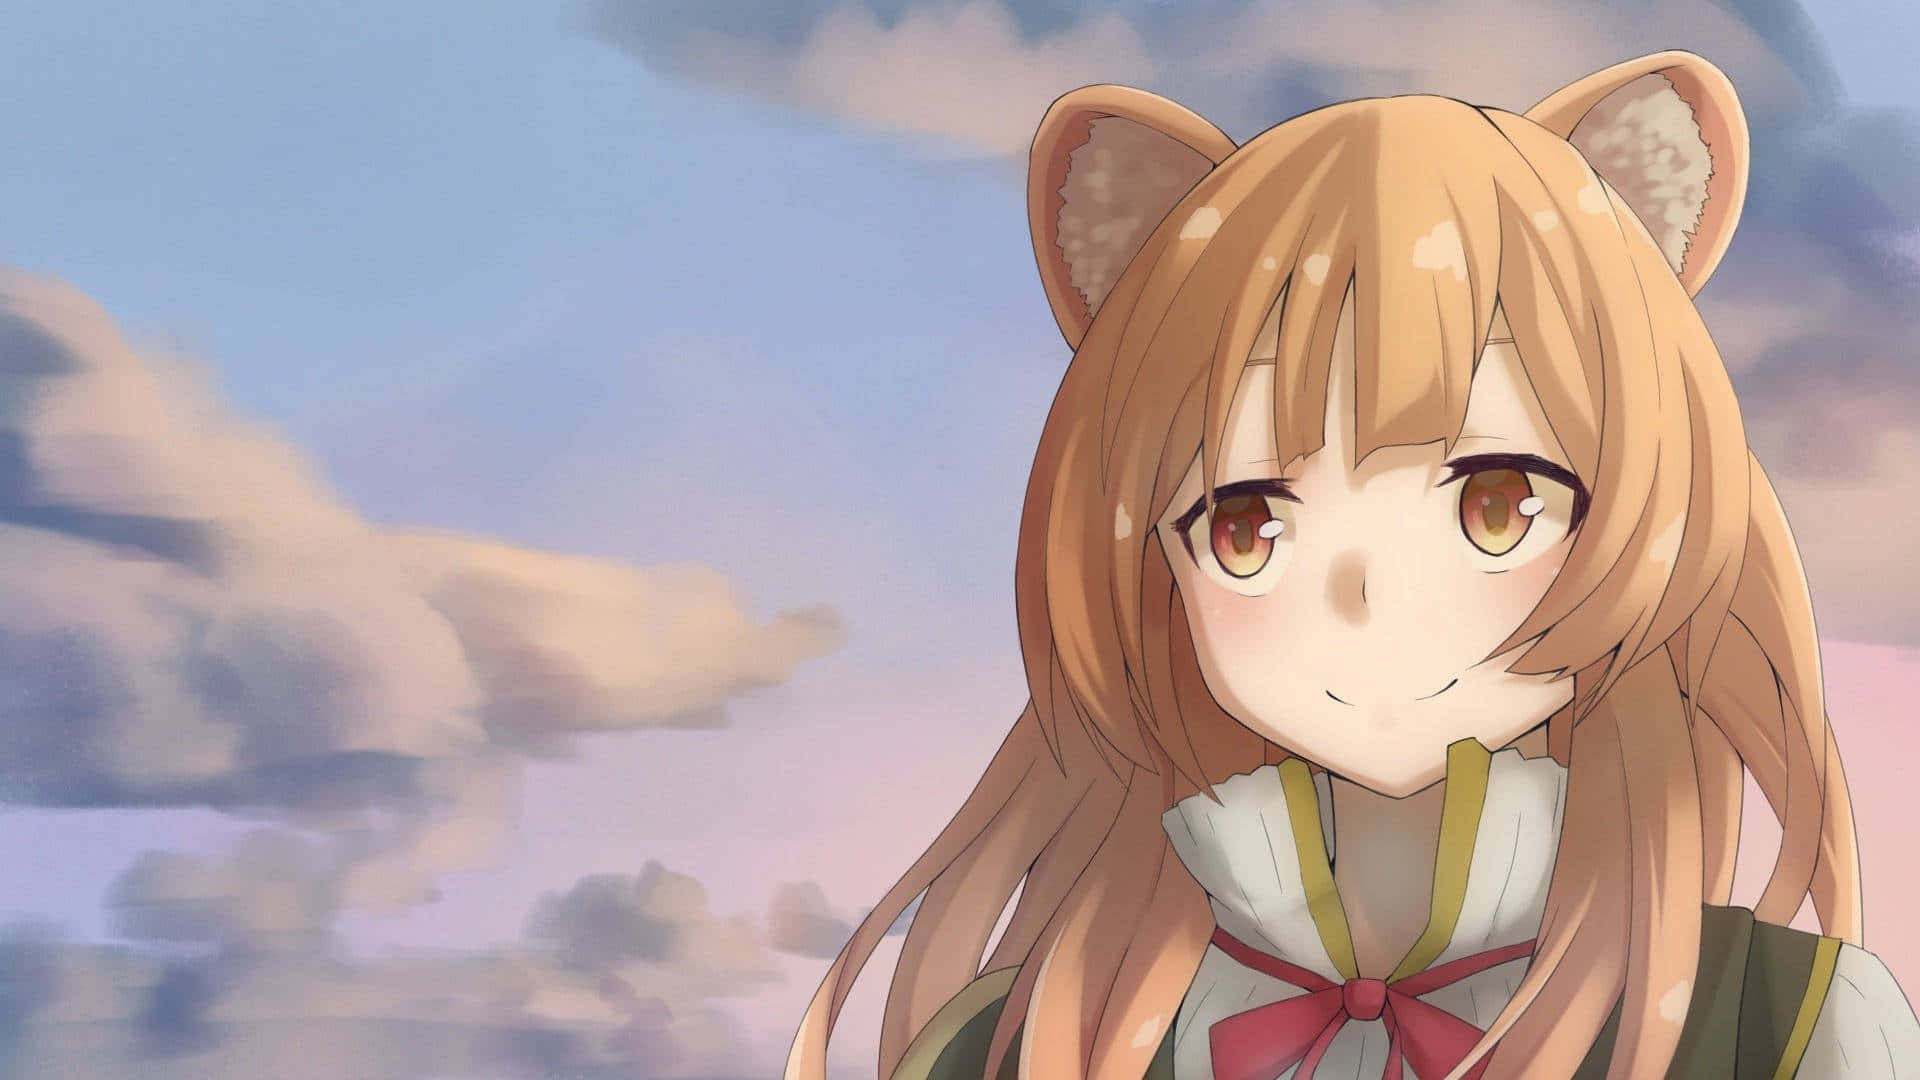 Join Naofumi on an Epic Adventure in the Anime Series The Rising of the Shield Hero